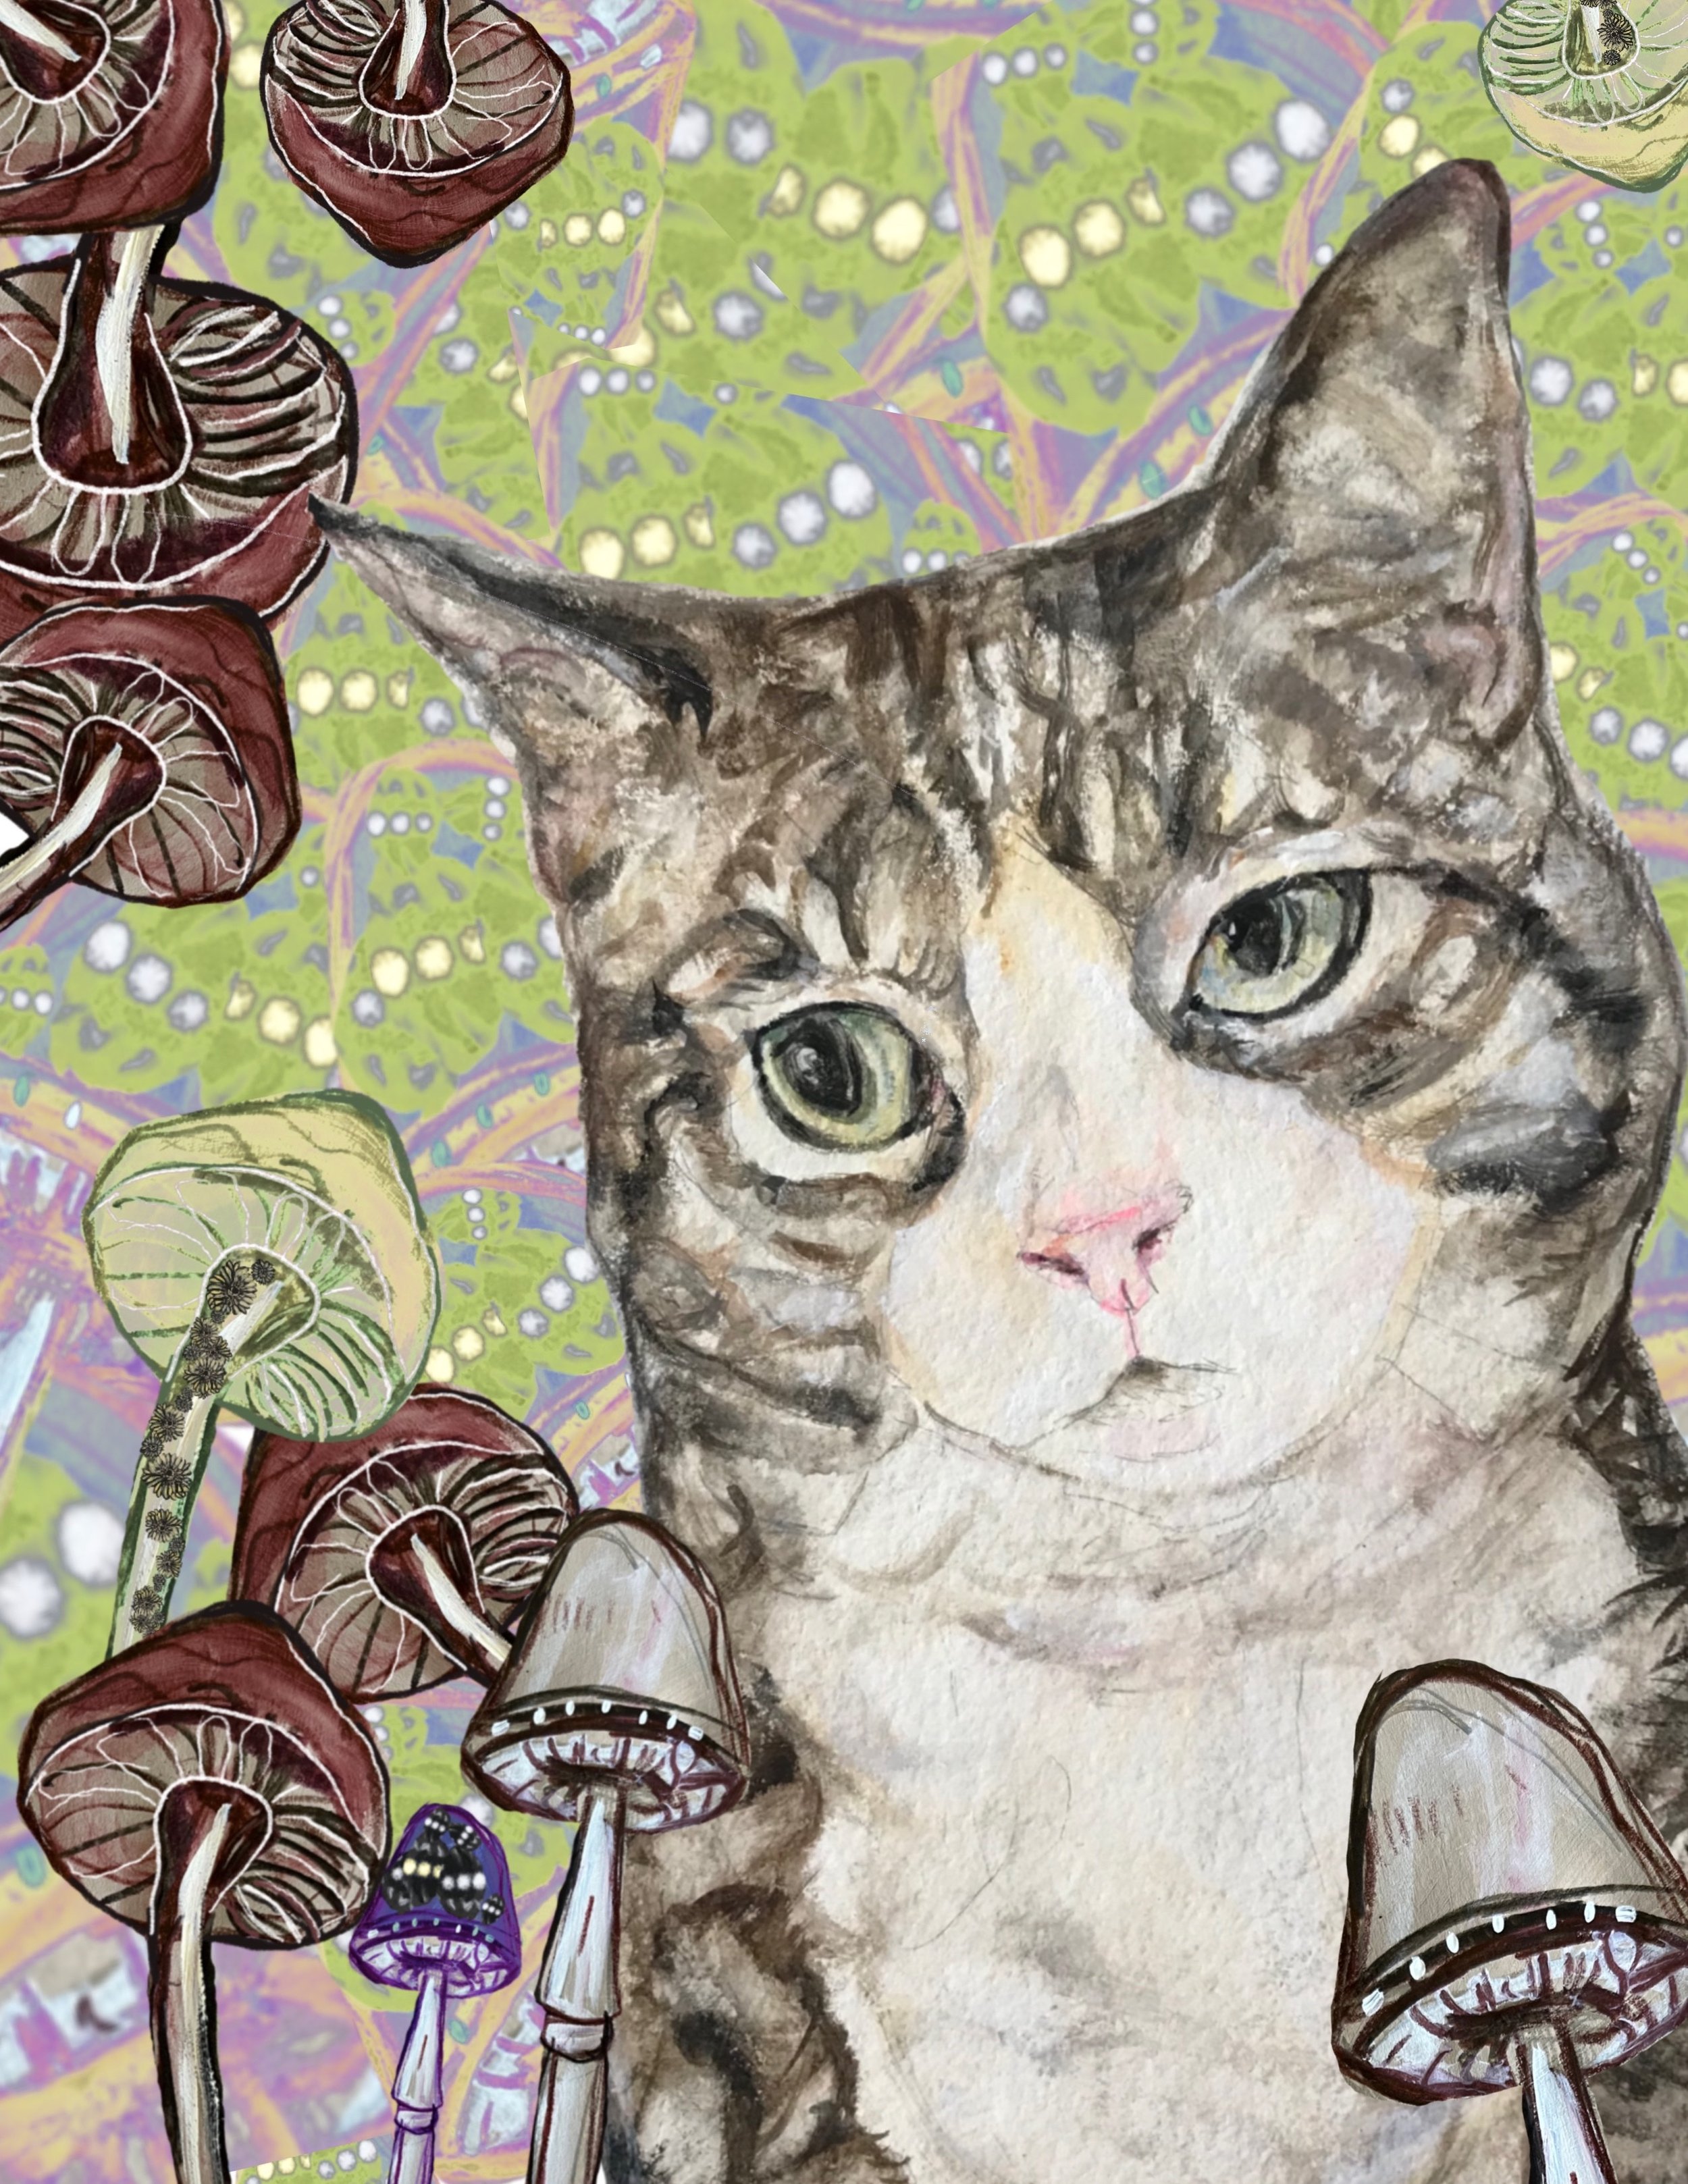  “Mabel Went to Sarah Lawrence” 18” x 24”; giclee print on cotton paper 1 of 2 $500.  Portrait of a tortoise shell cat surrounded by mushrooms 